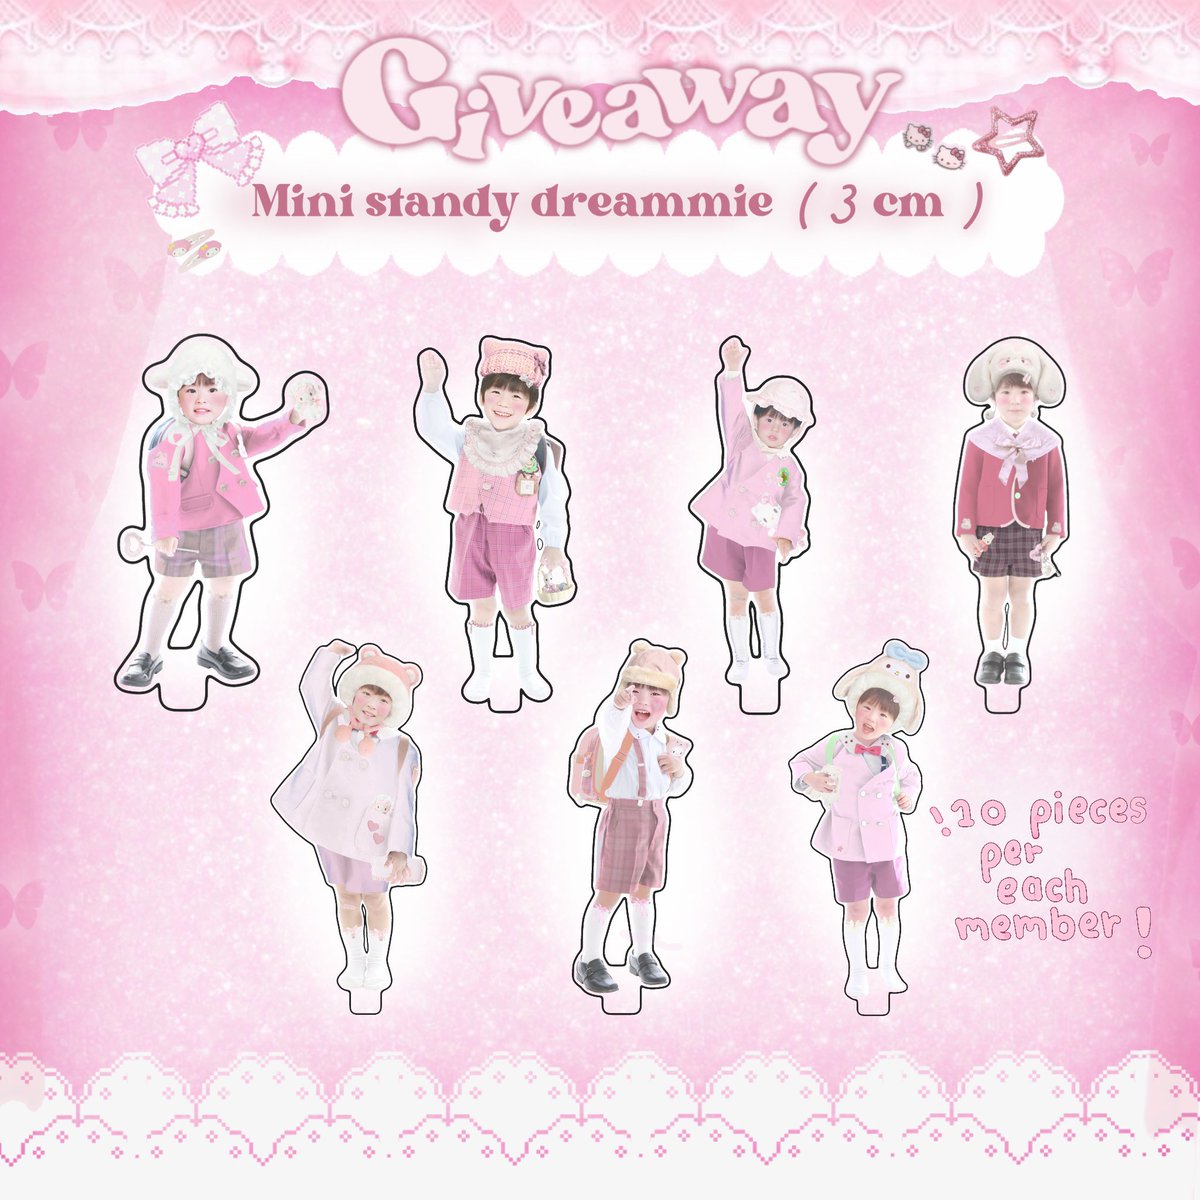 ˗ˏˋ ꒰ pls  kindly rt .ᐟ ꒱ ˎˊ˗
       
 𓍢ִ ໋ Giveaway for nctzen 🐰ྀི 
 
—; ⋆⑅ 🩰 mini standy ( 3cm) ☆
10 pieces per each member ೀ

date ; 22 june 2024
time ; tbc
location ; Rajamangala National Stadium

#NCTDREAM_THEDREAMSHOW3_in_BKK